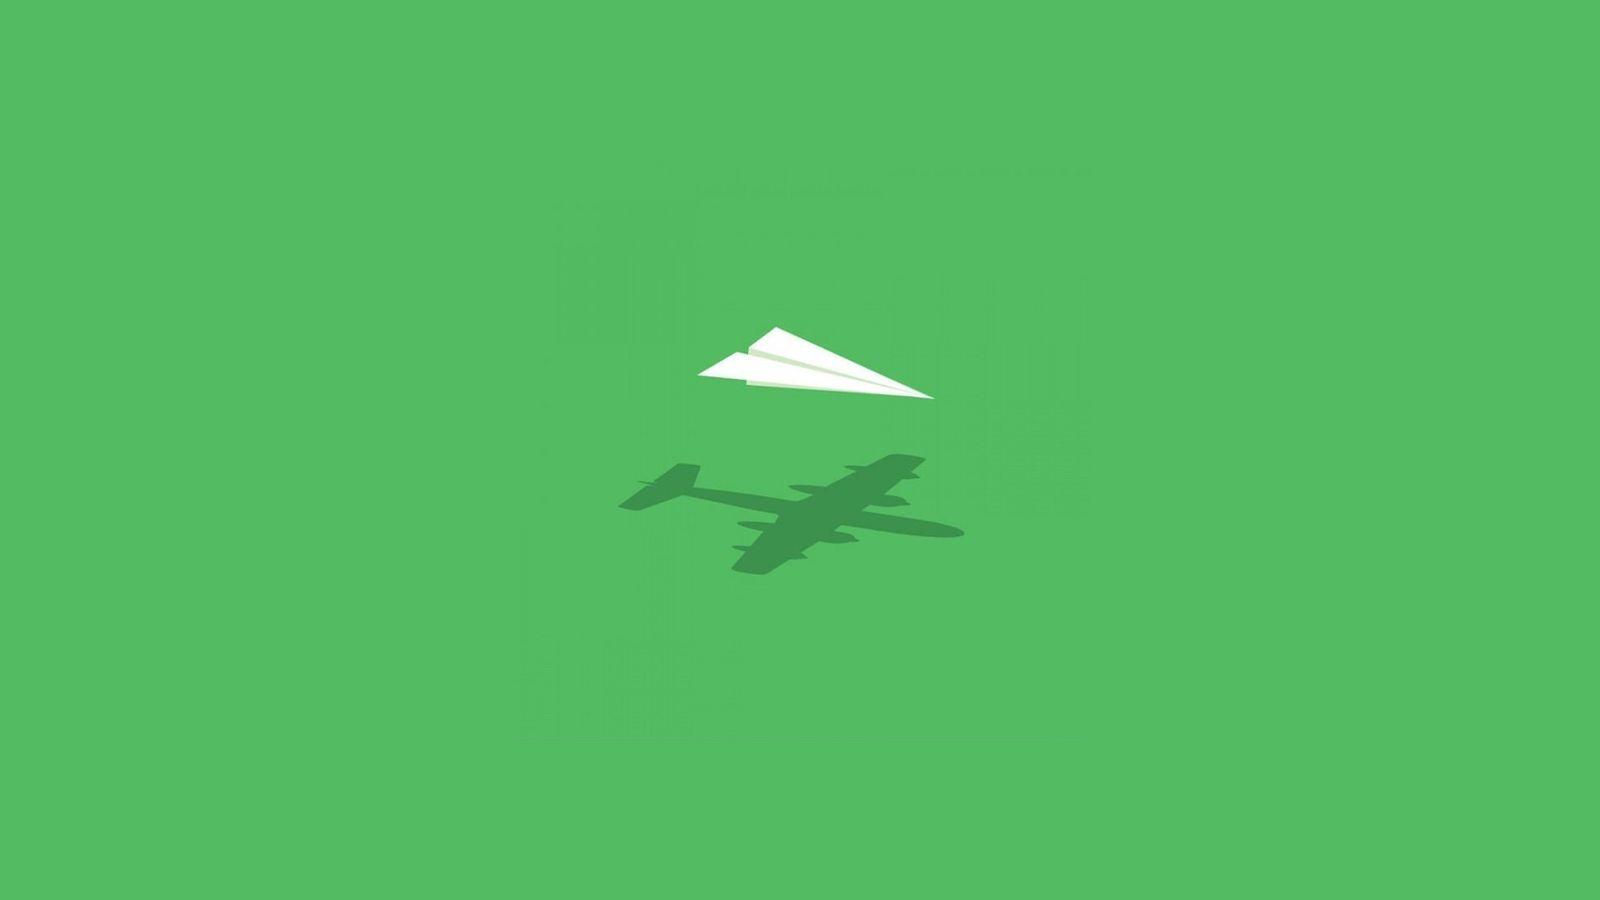 Airplane Silhouette and Paper Art Plane Minimal HD Wallpaper